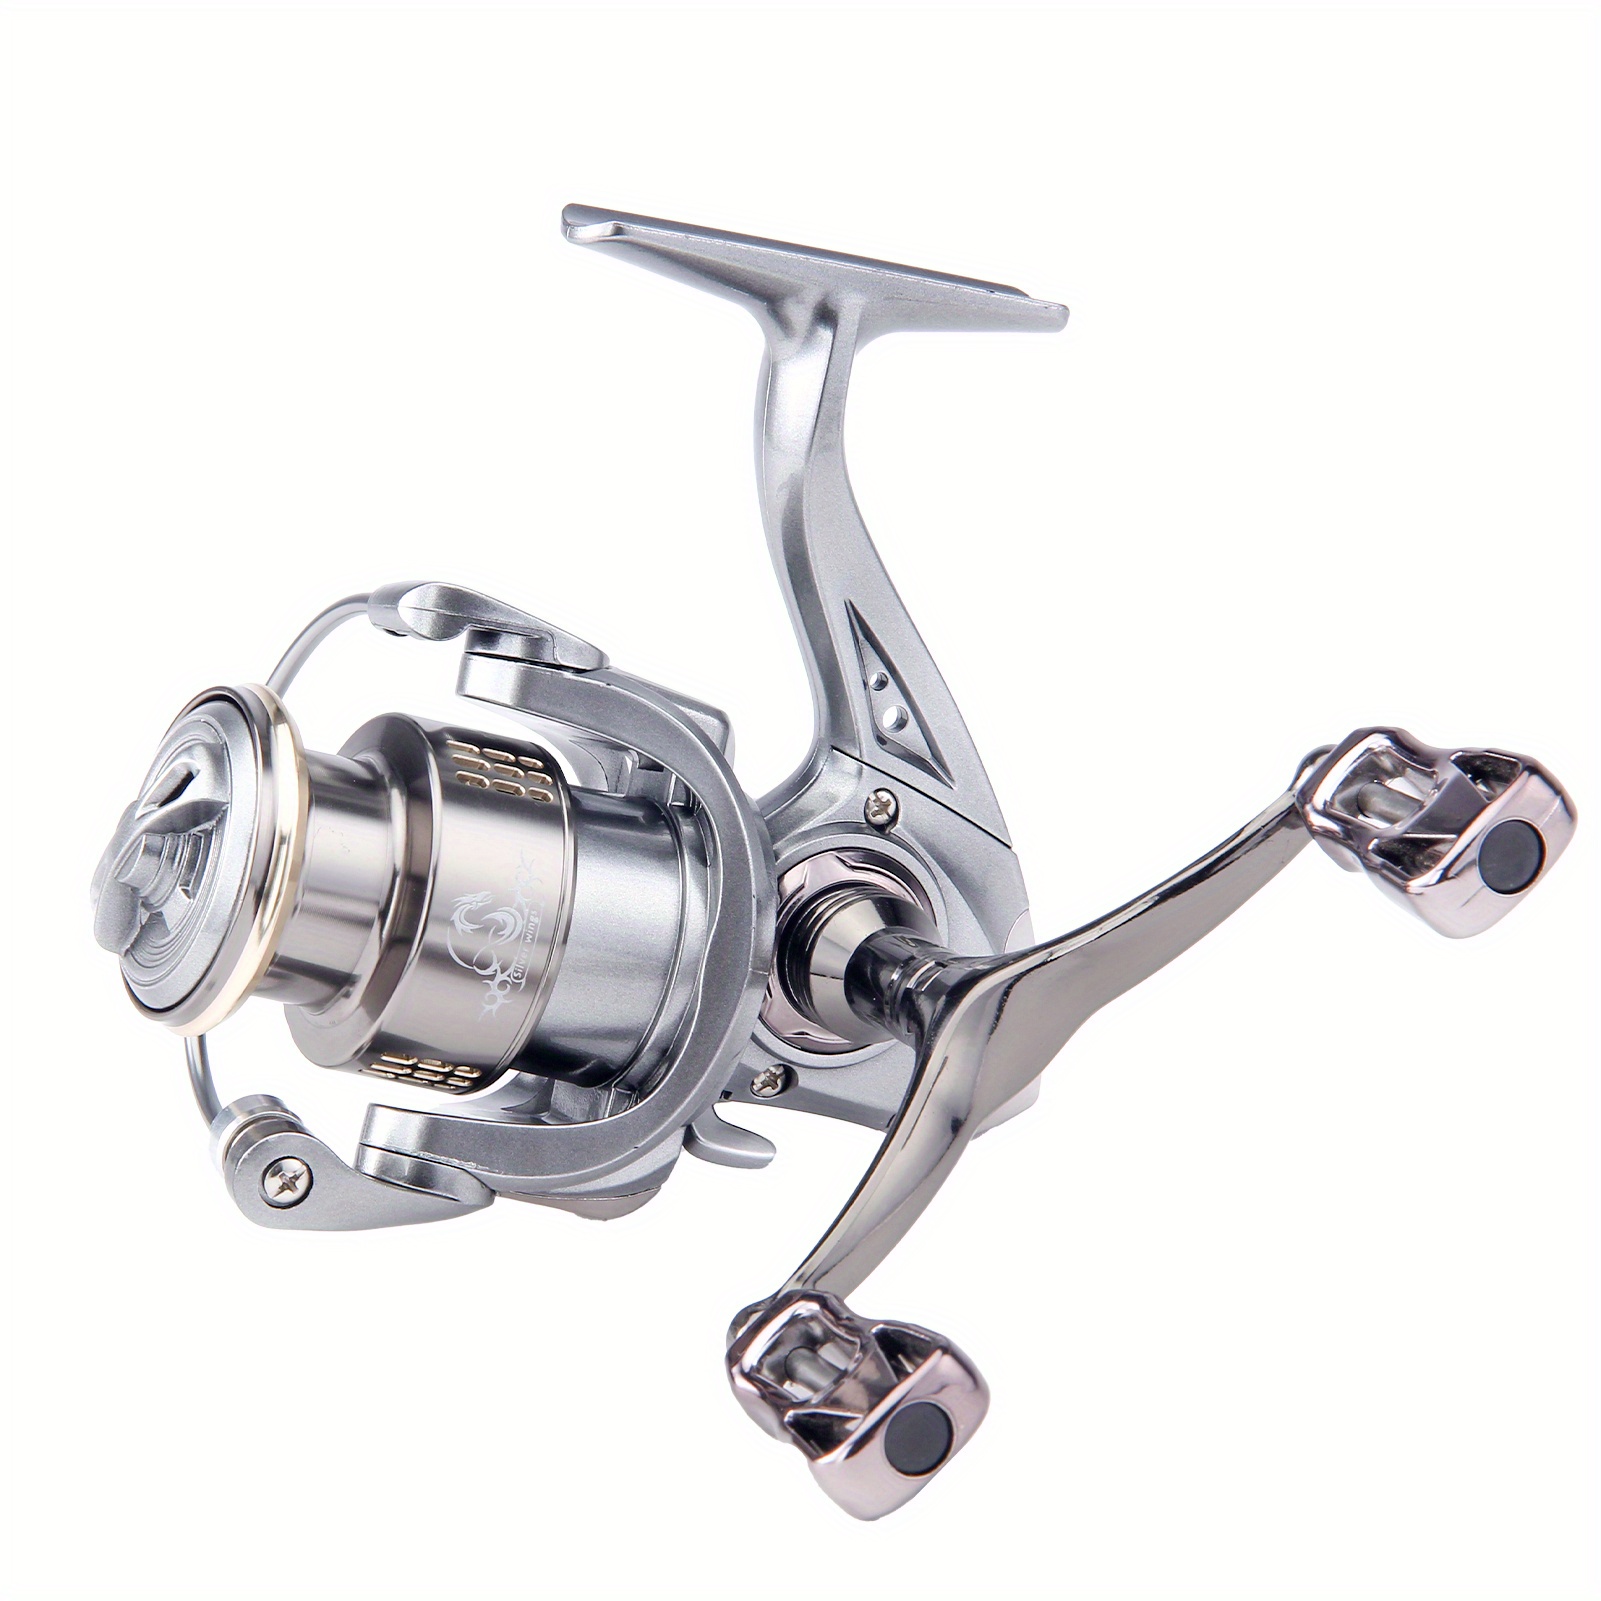 HAUT TON SLIVER WINDS SPINNING FISHING REEL, 13 BB, 5.2:1Gear Ratio, 4-14Lb  Max Drag, Ultra Light, Include Blance Bar